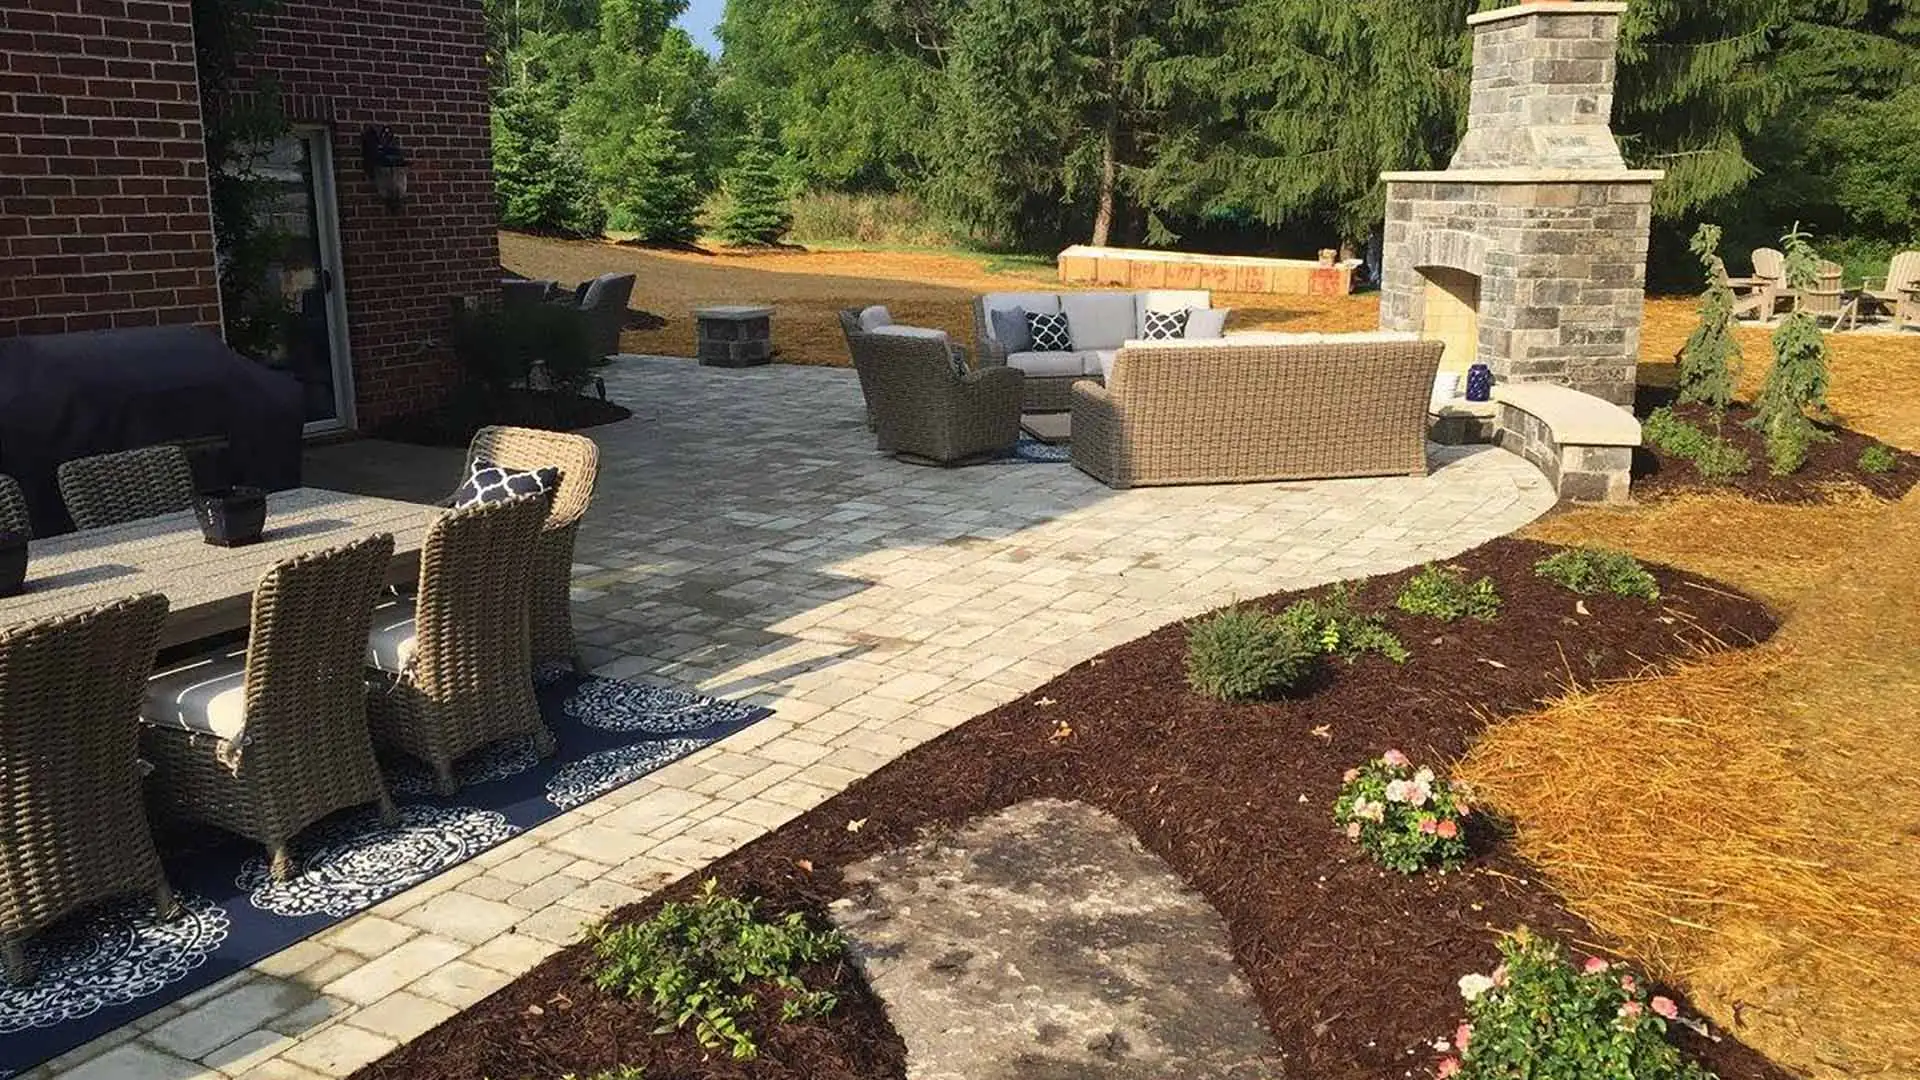 3 Ways to Take Your Outdoor Living Space to the Next Level